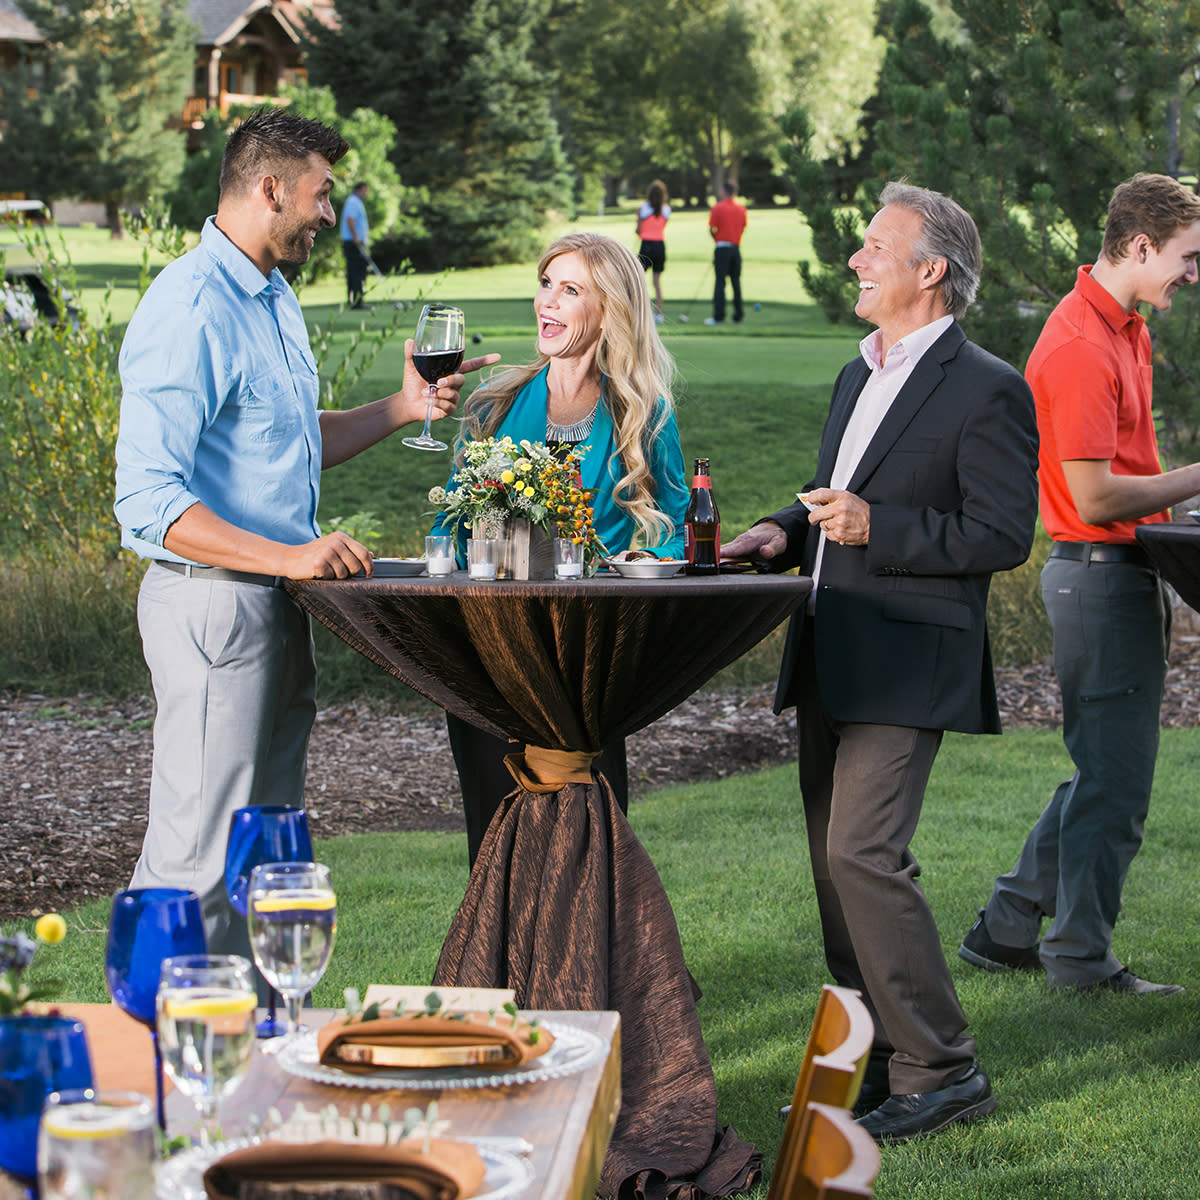 Outdoor Reception and Dinner at Hotel Park City, Utah